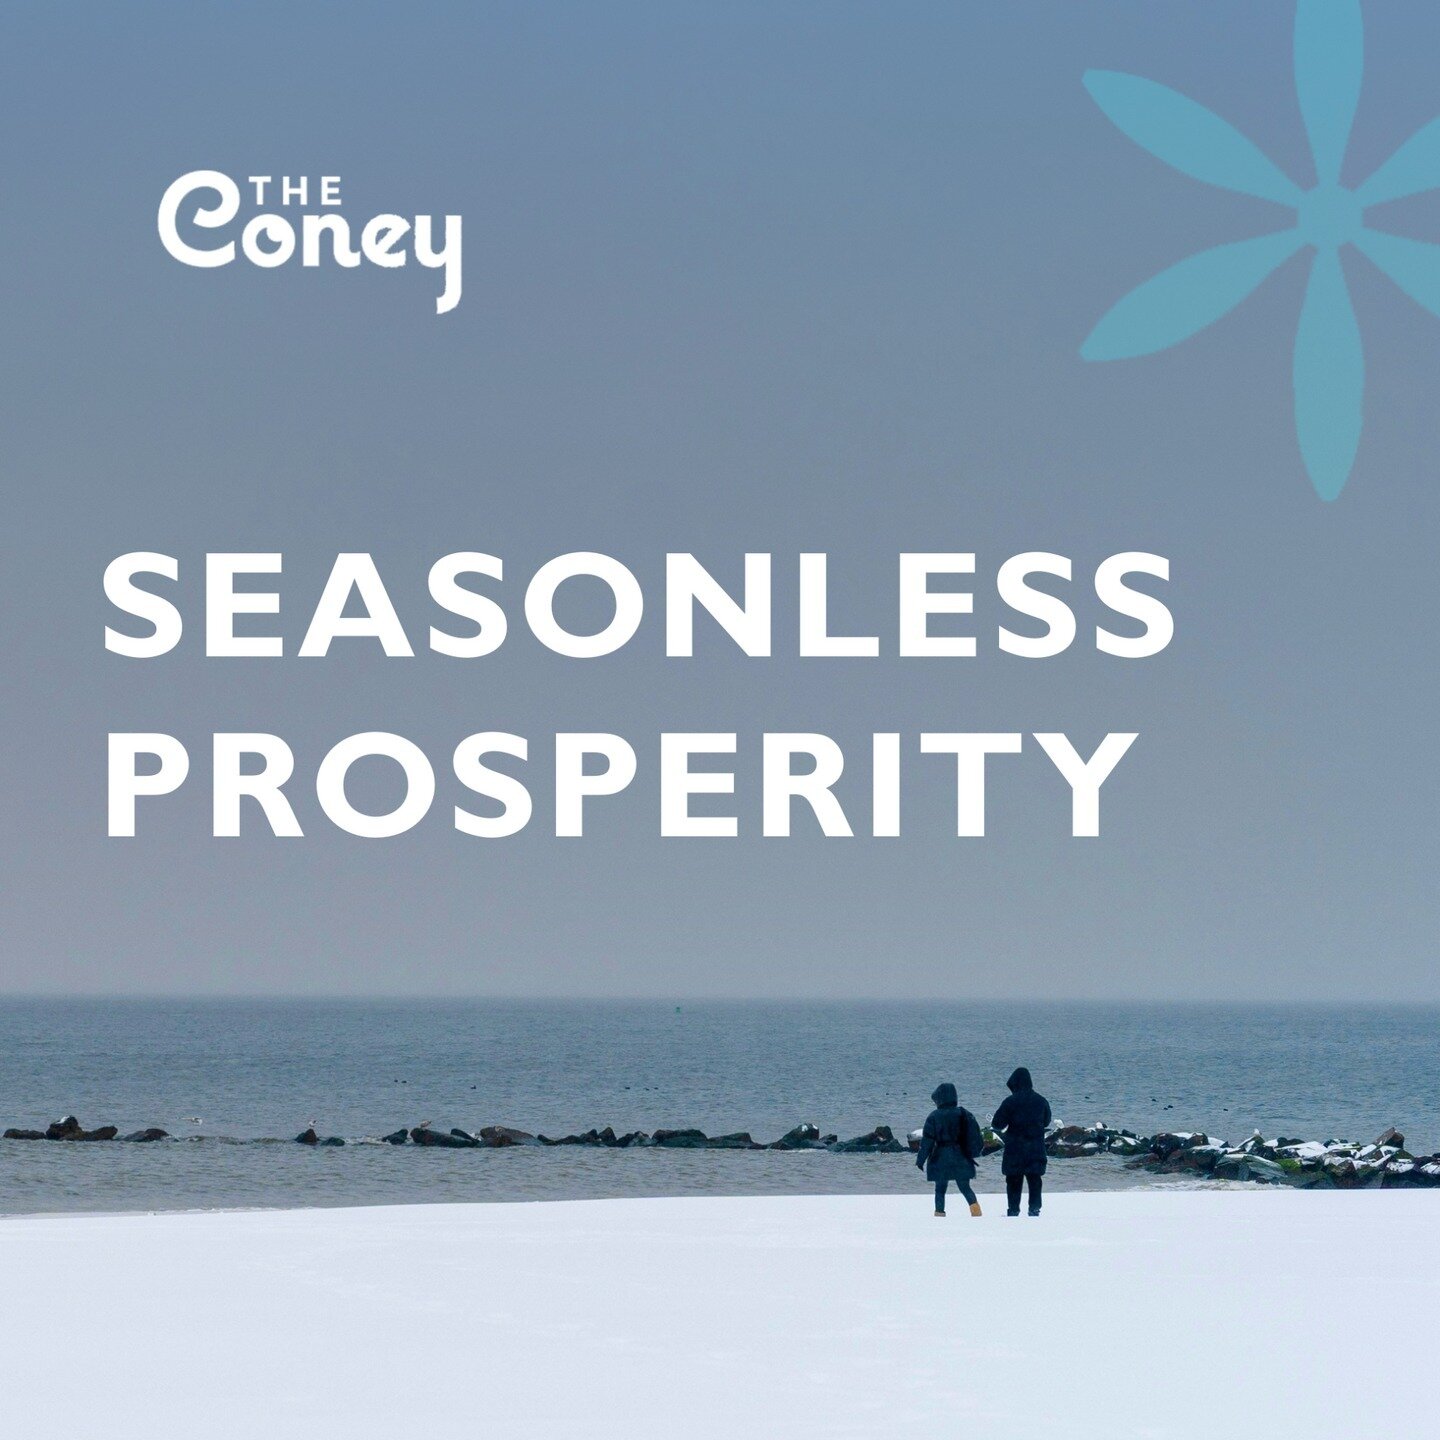 Embracing winter's calm, we are actively preparing for a future of year-round economic vitality. 

The Coney's commitment to this vision is laying the foundation for sustainable growth that transcends seasons. We will uphold our promise of prosperity